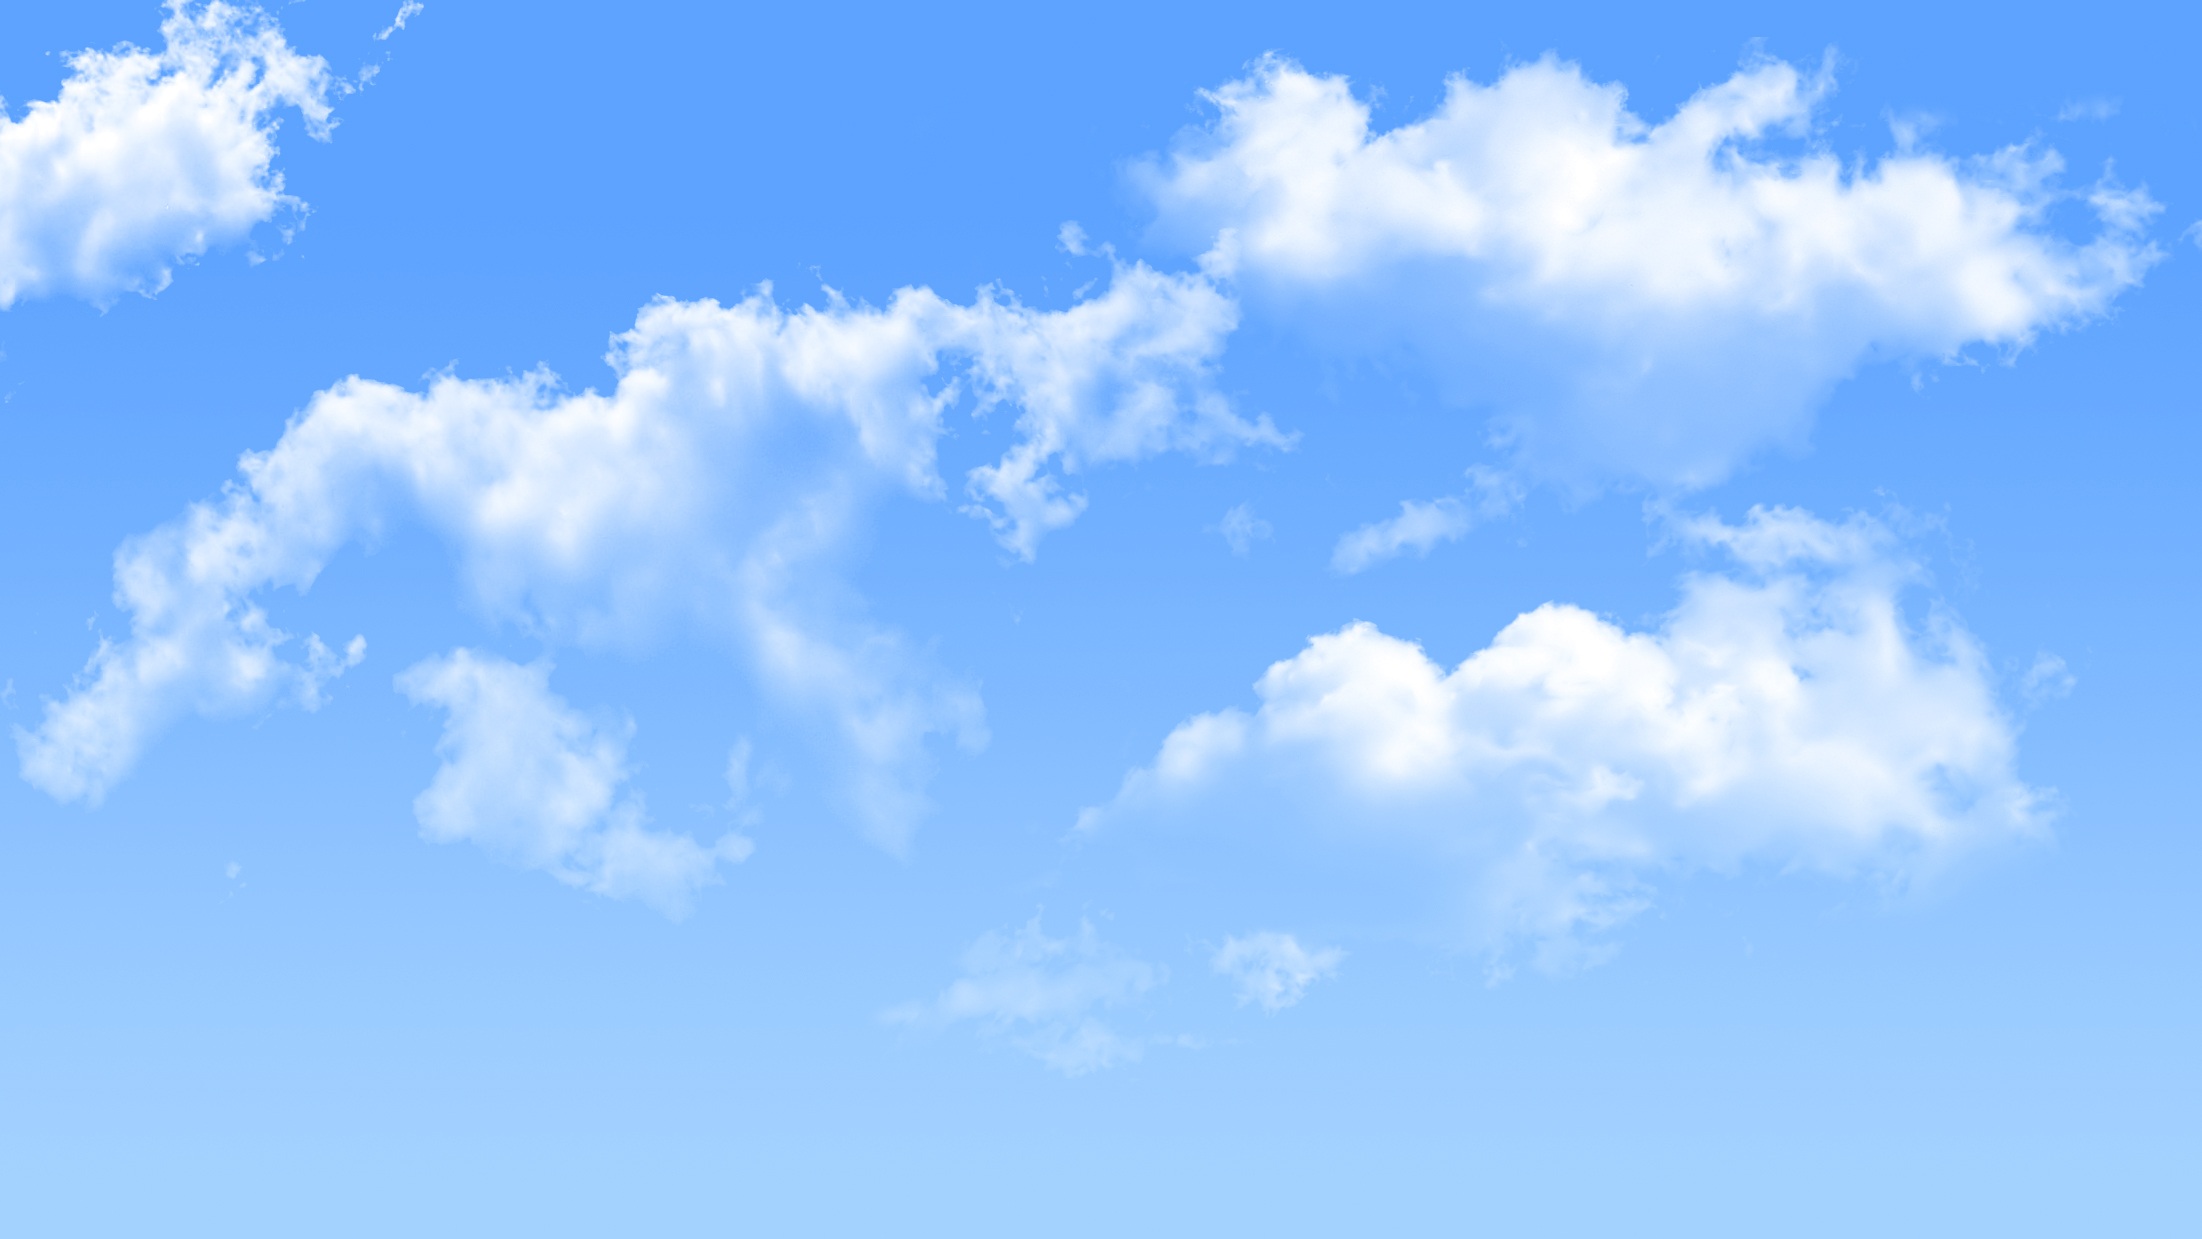 blue sky with clouds, background, nature, climate, clear, photo